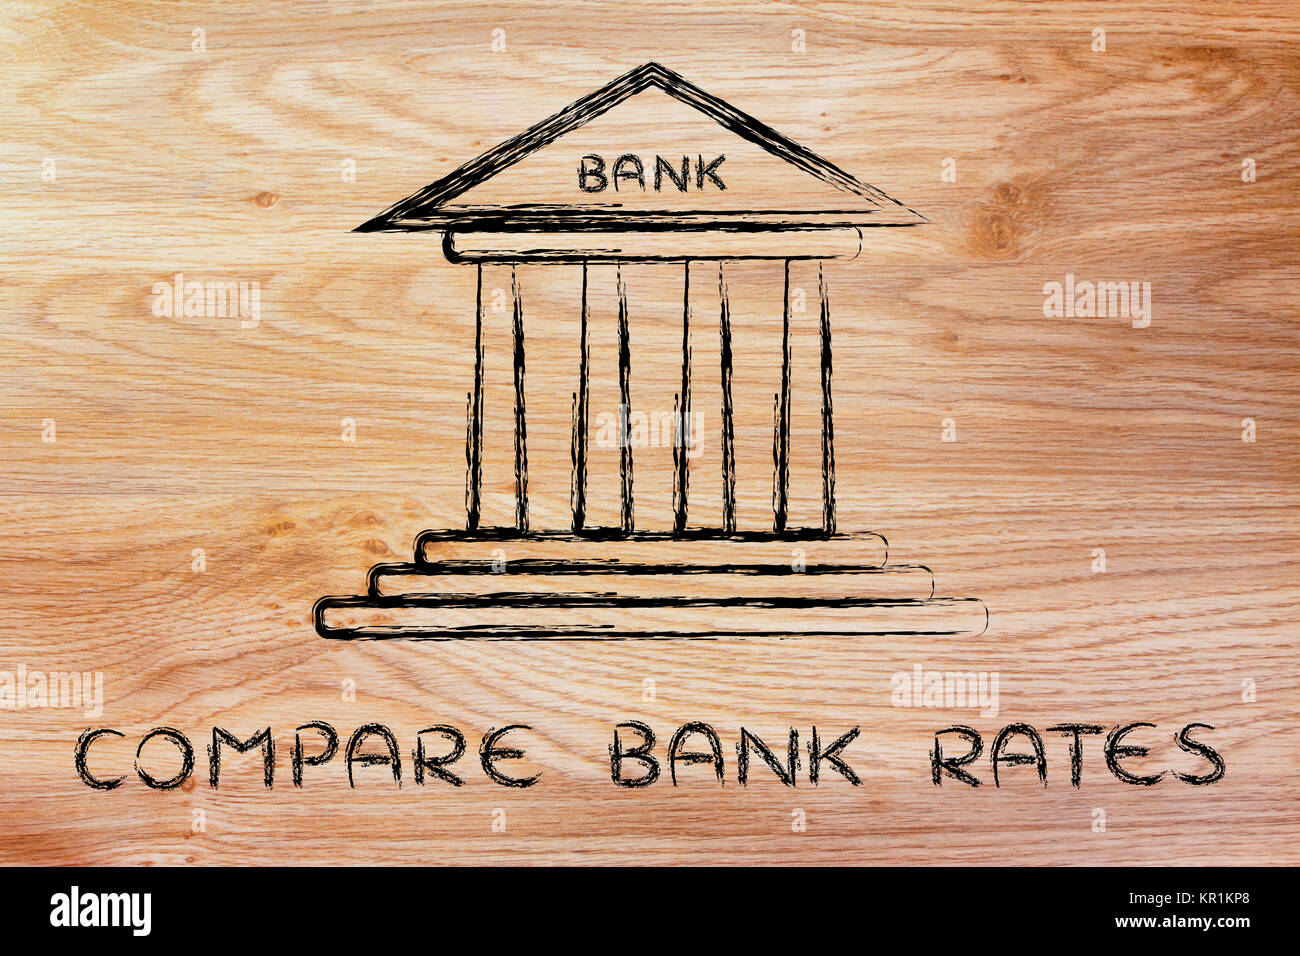 compare bank rates Stock Photo